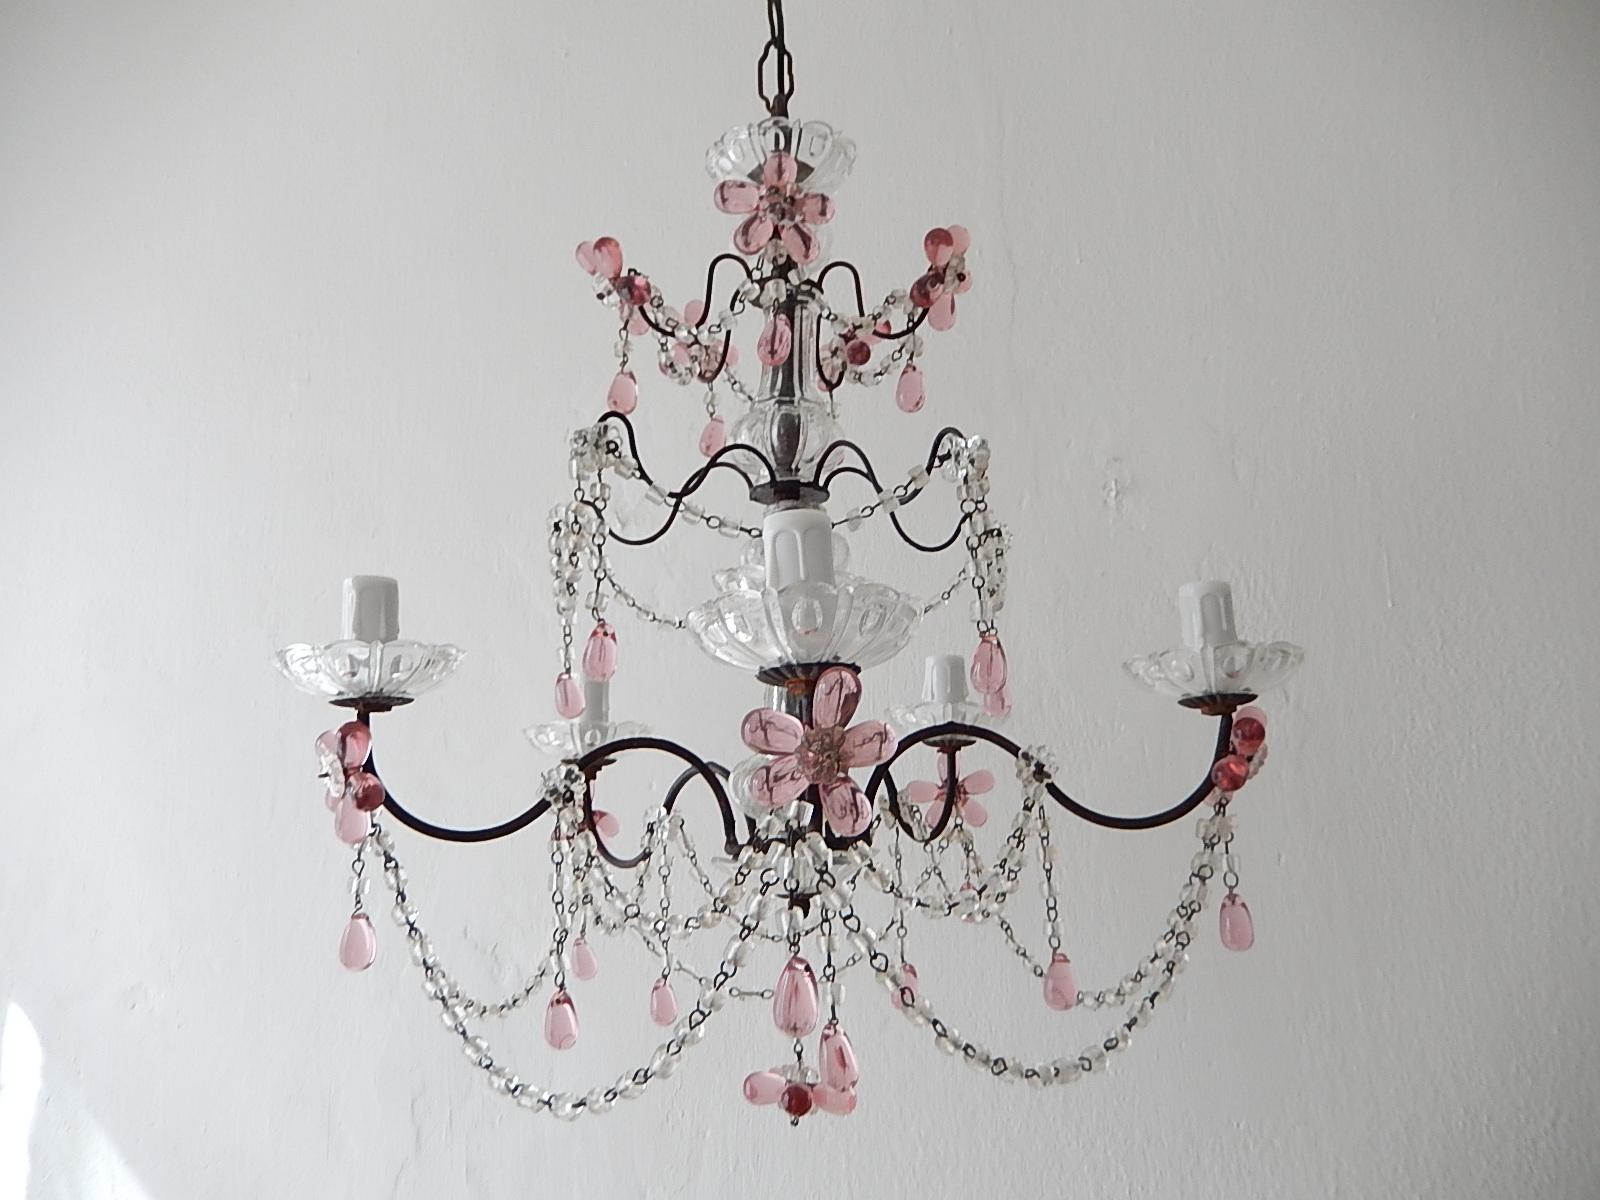 Housing five-lights, bobéches in crystal. Adoring 3 tiers of macaroni crystal swags with 11 Murano coloured drop flowers and 20 single drops. Rare color, it is a mix between pink and light amethyst. Murano blown glass center and crystal bobéches on